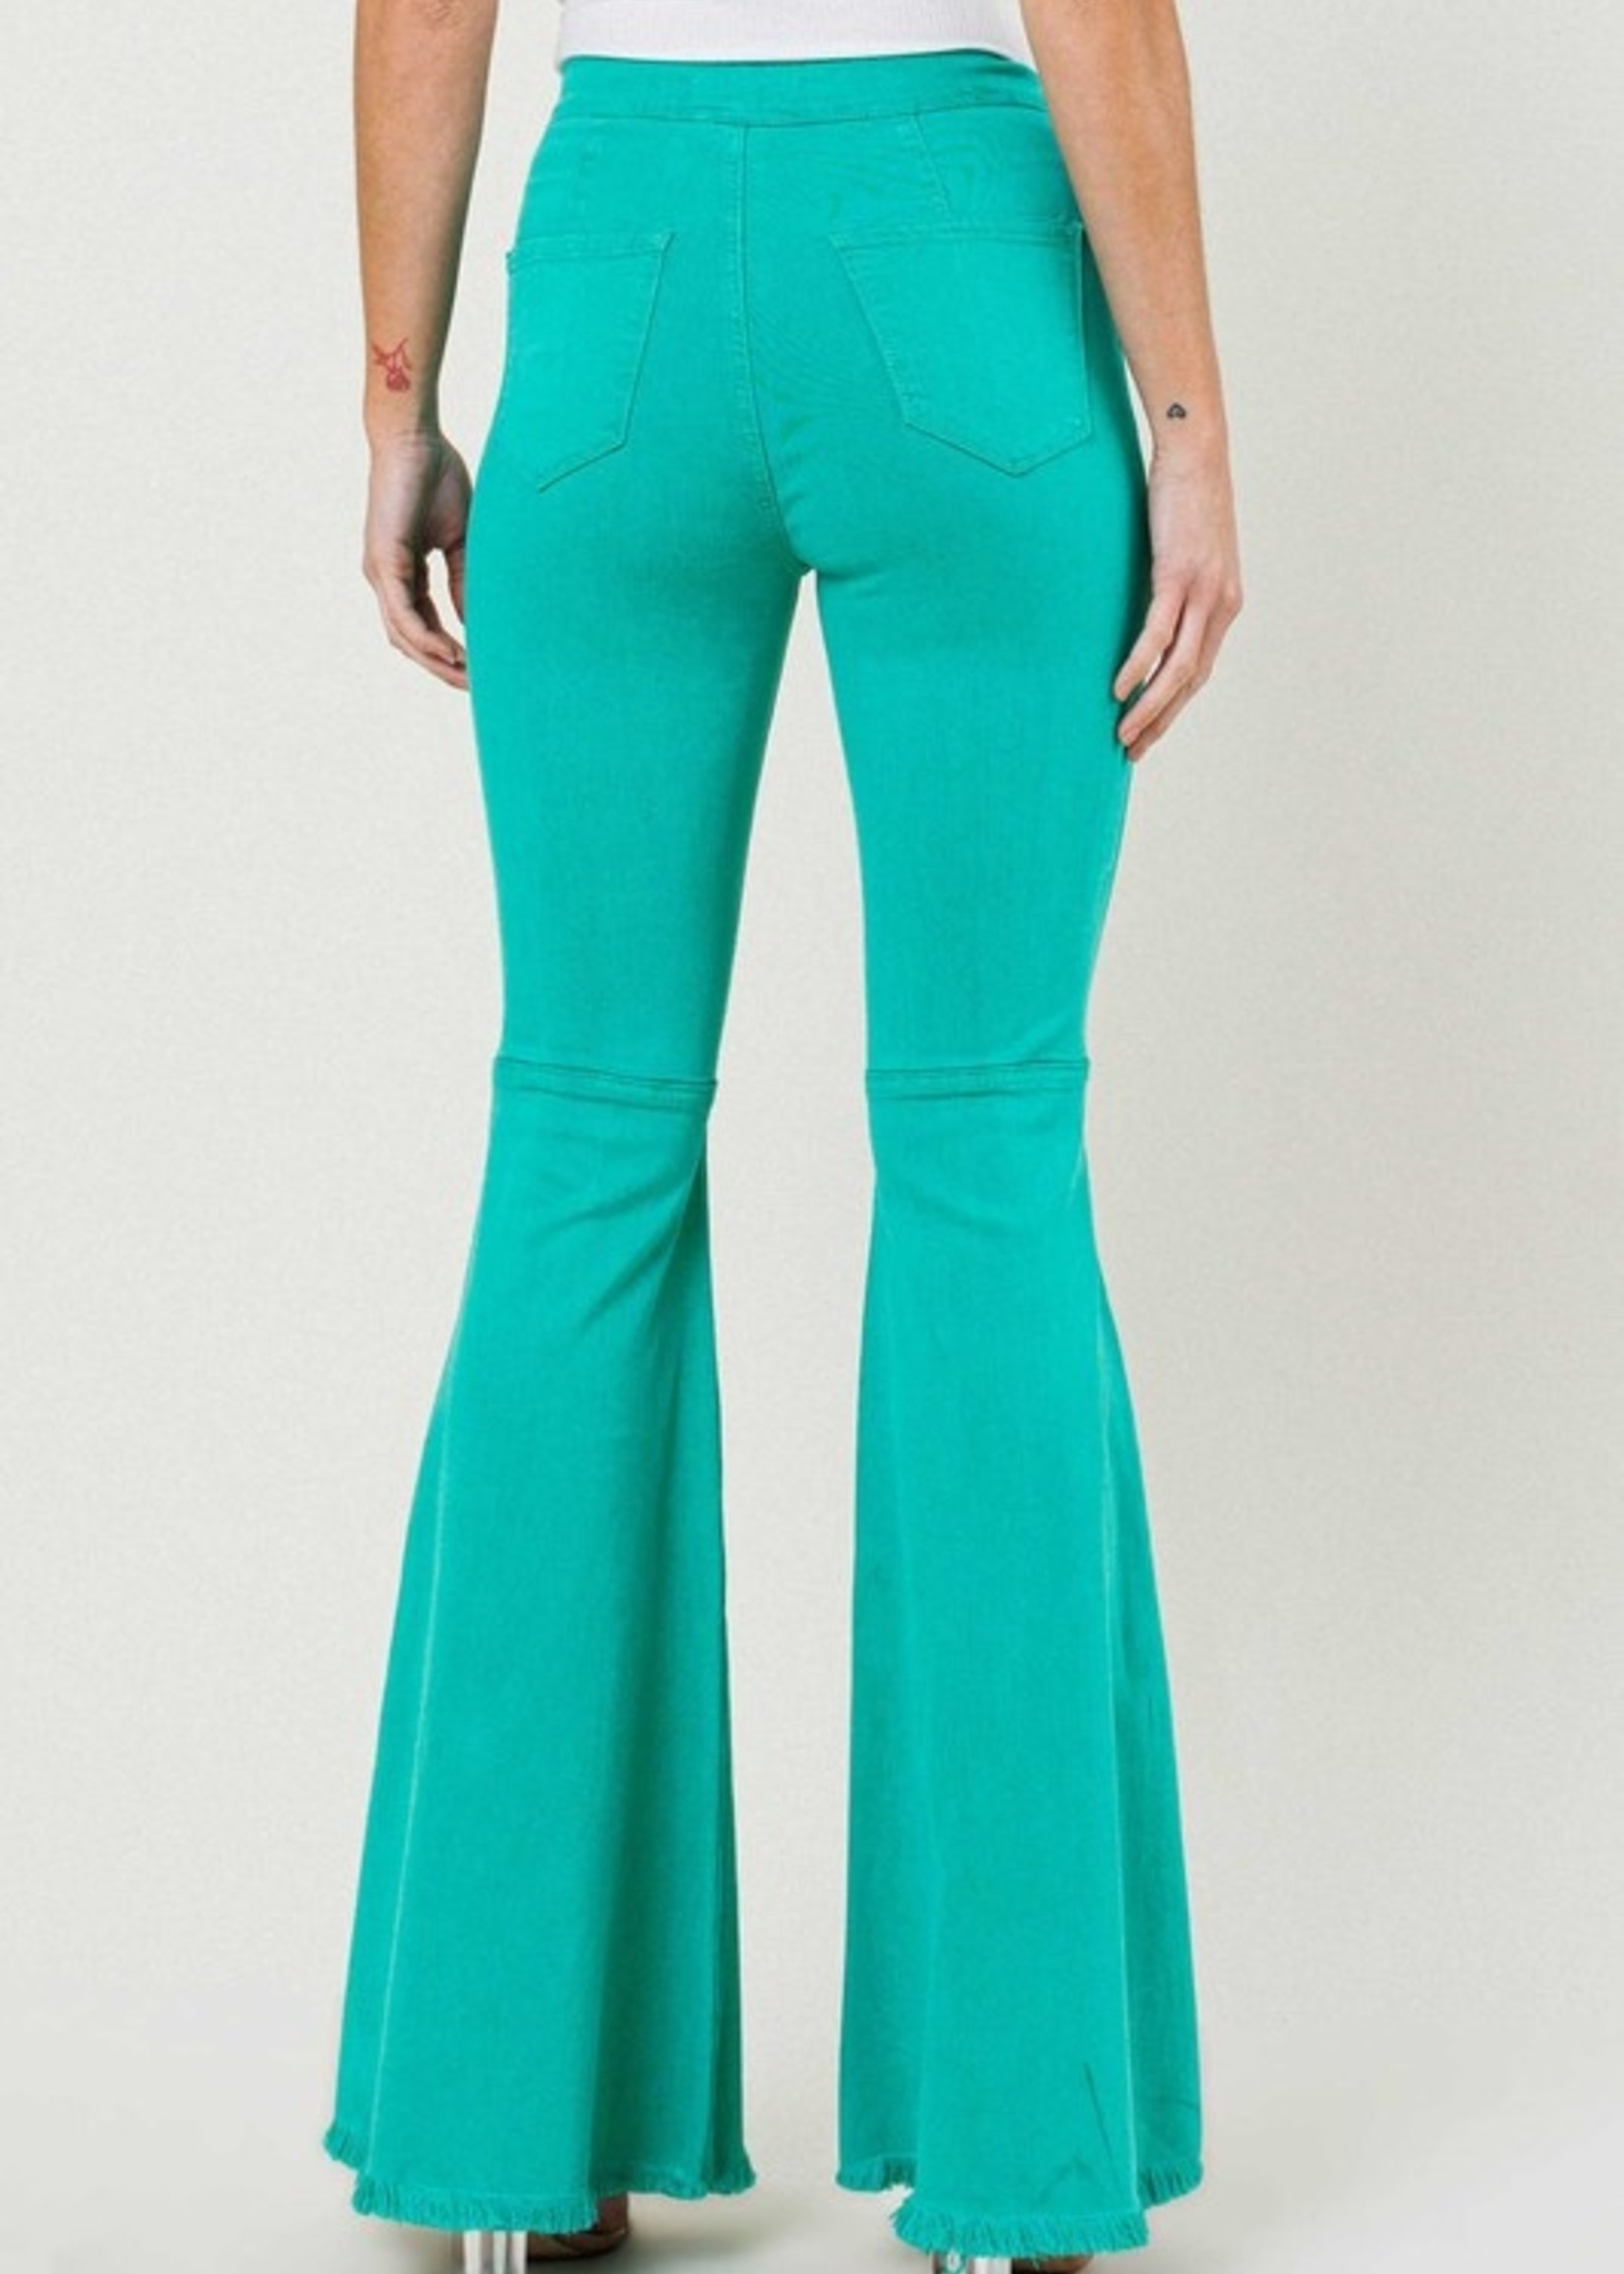 Highed Waisted Green Flares